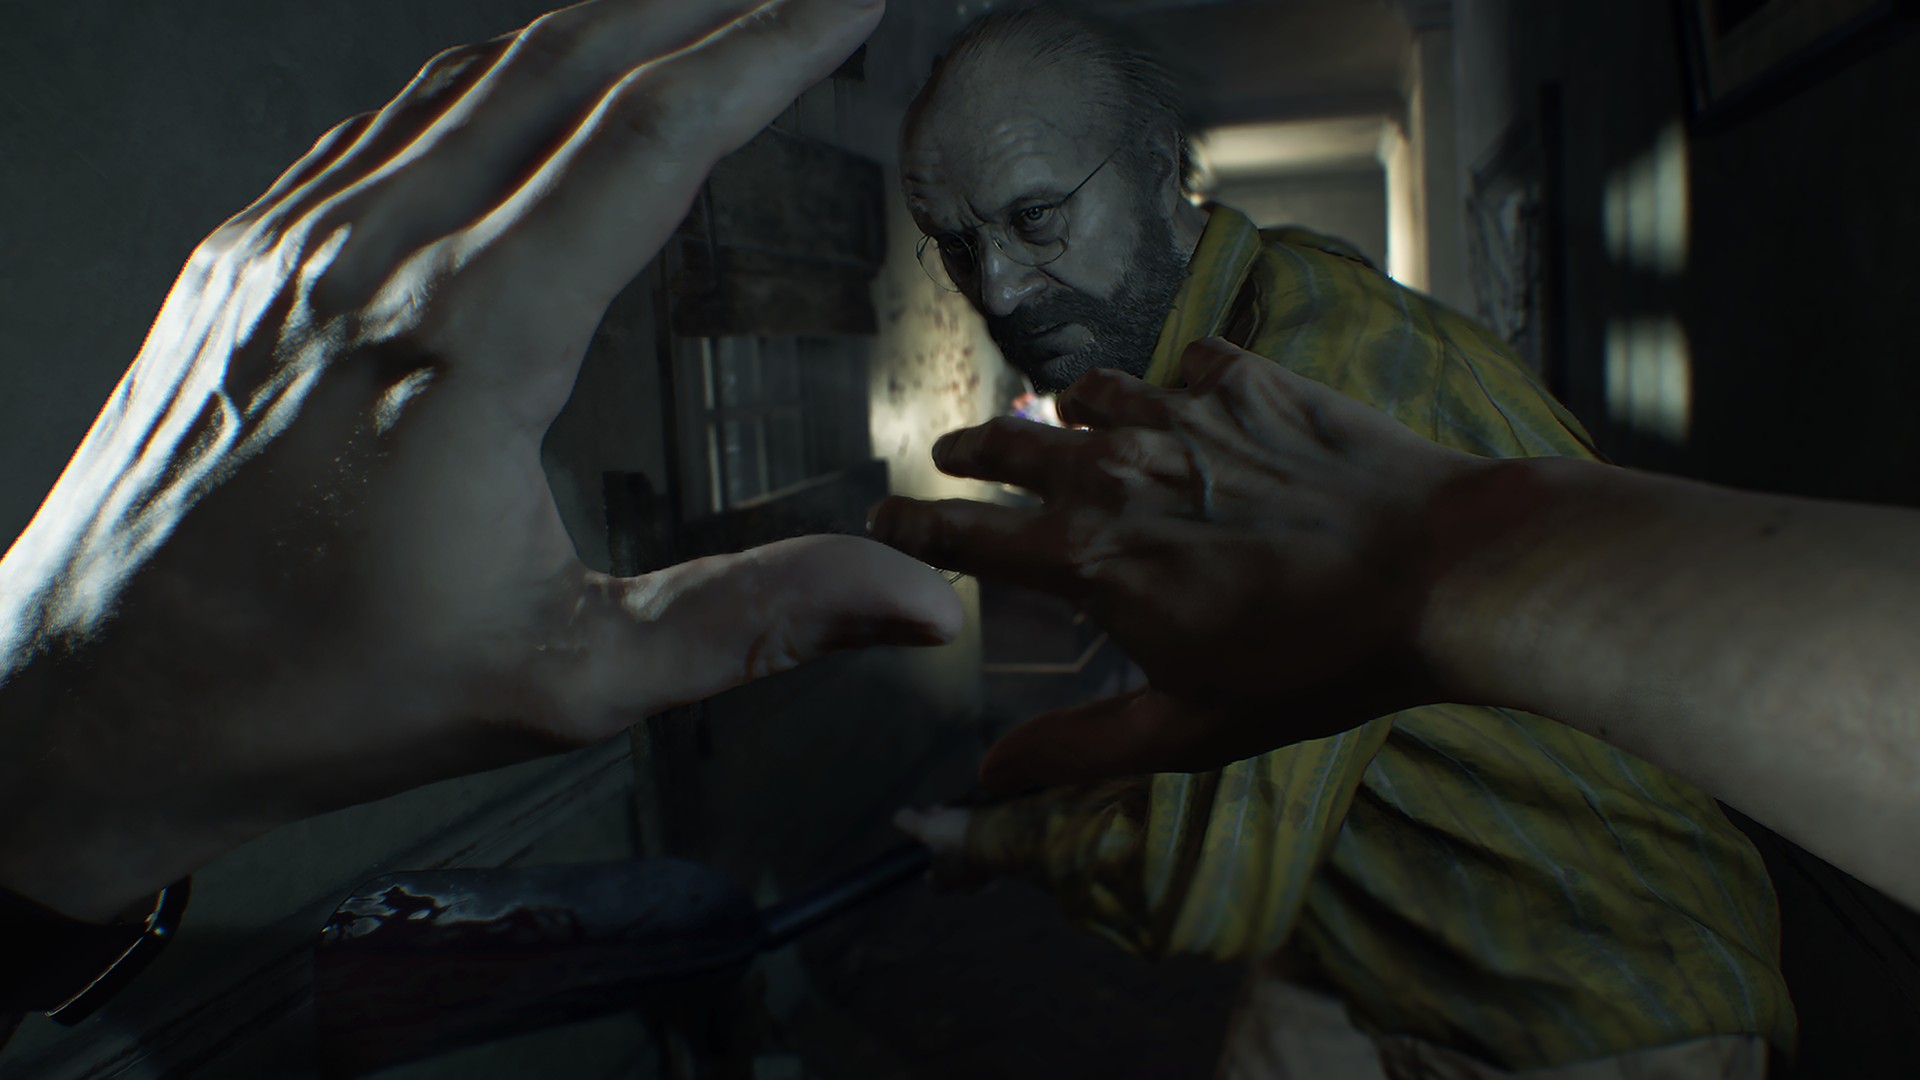 Resident Evil 7: biohazard doesn’t just revitalize a franchise, but also is one of the best Xbox One games